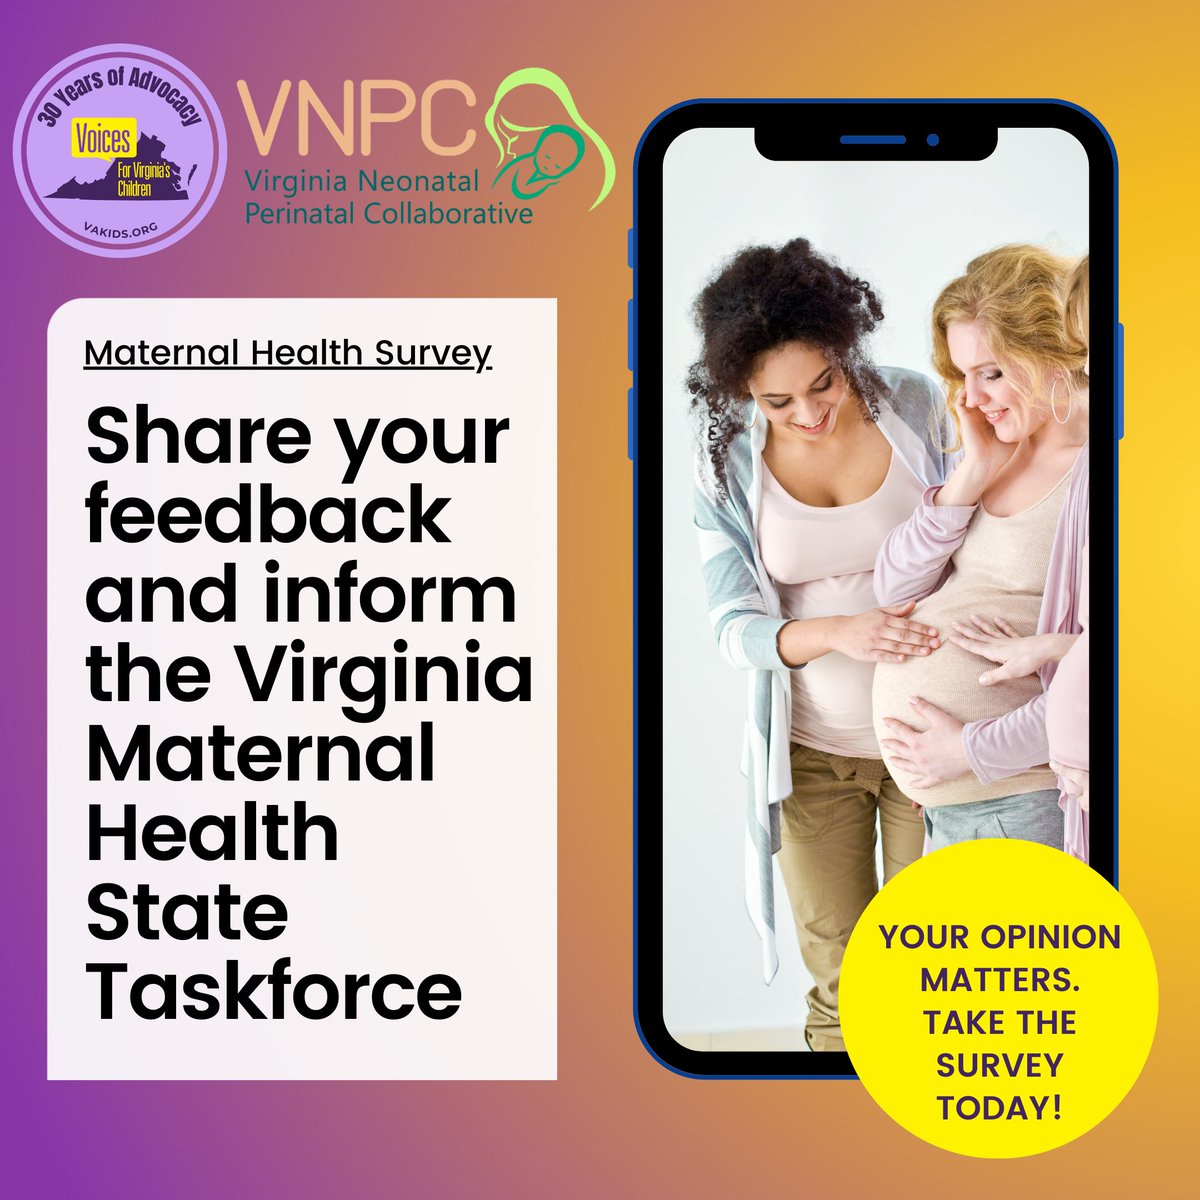 Voices is part of the Maternal Health State Task Force, convened by the @govnpc and funded through the HRSA Maternal Health Innovation grant. We invite any organization or agency with Maternal Health priorities in VA to complete this brief survey: 
ow.ly/8fg350RUoki